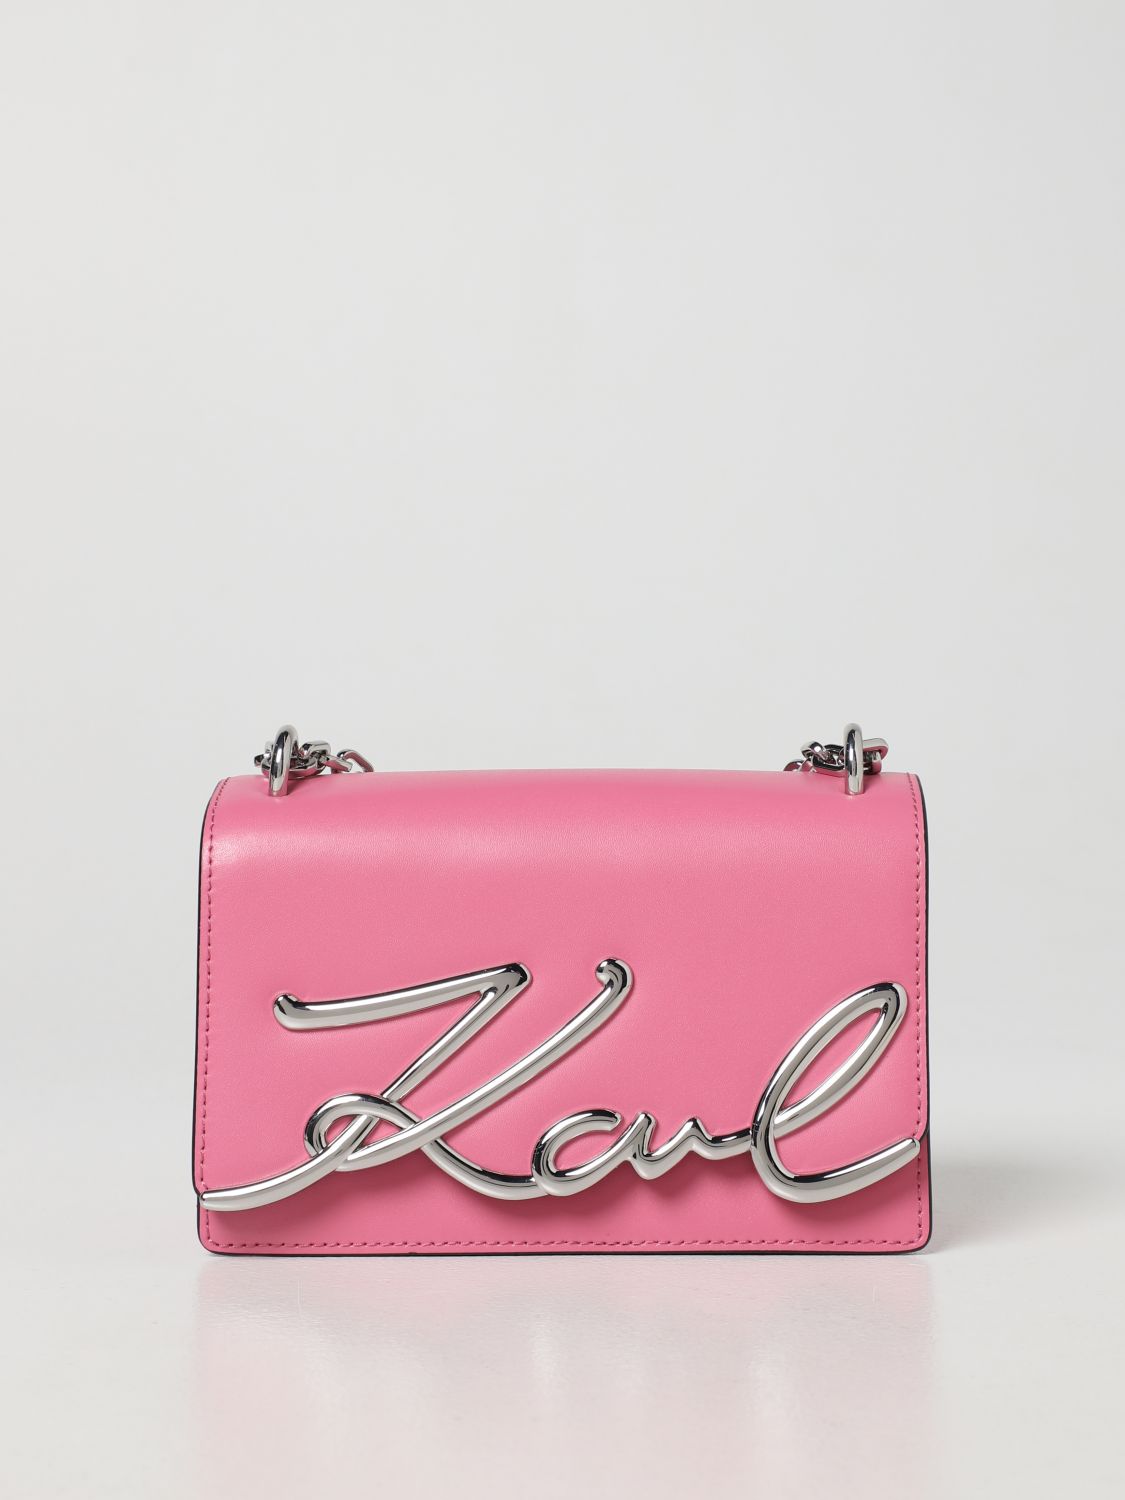 Discover 82+ pink karl lagerfeld bags - in.duhocakina